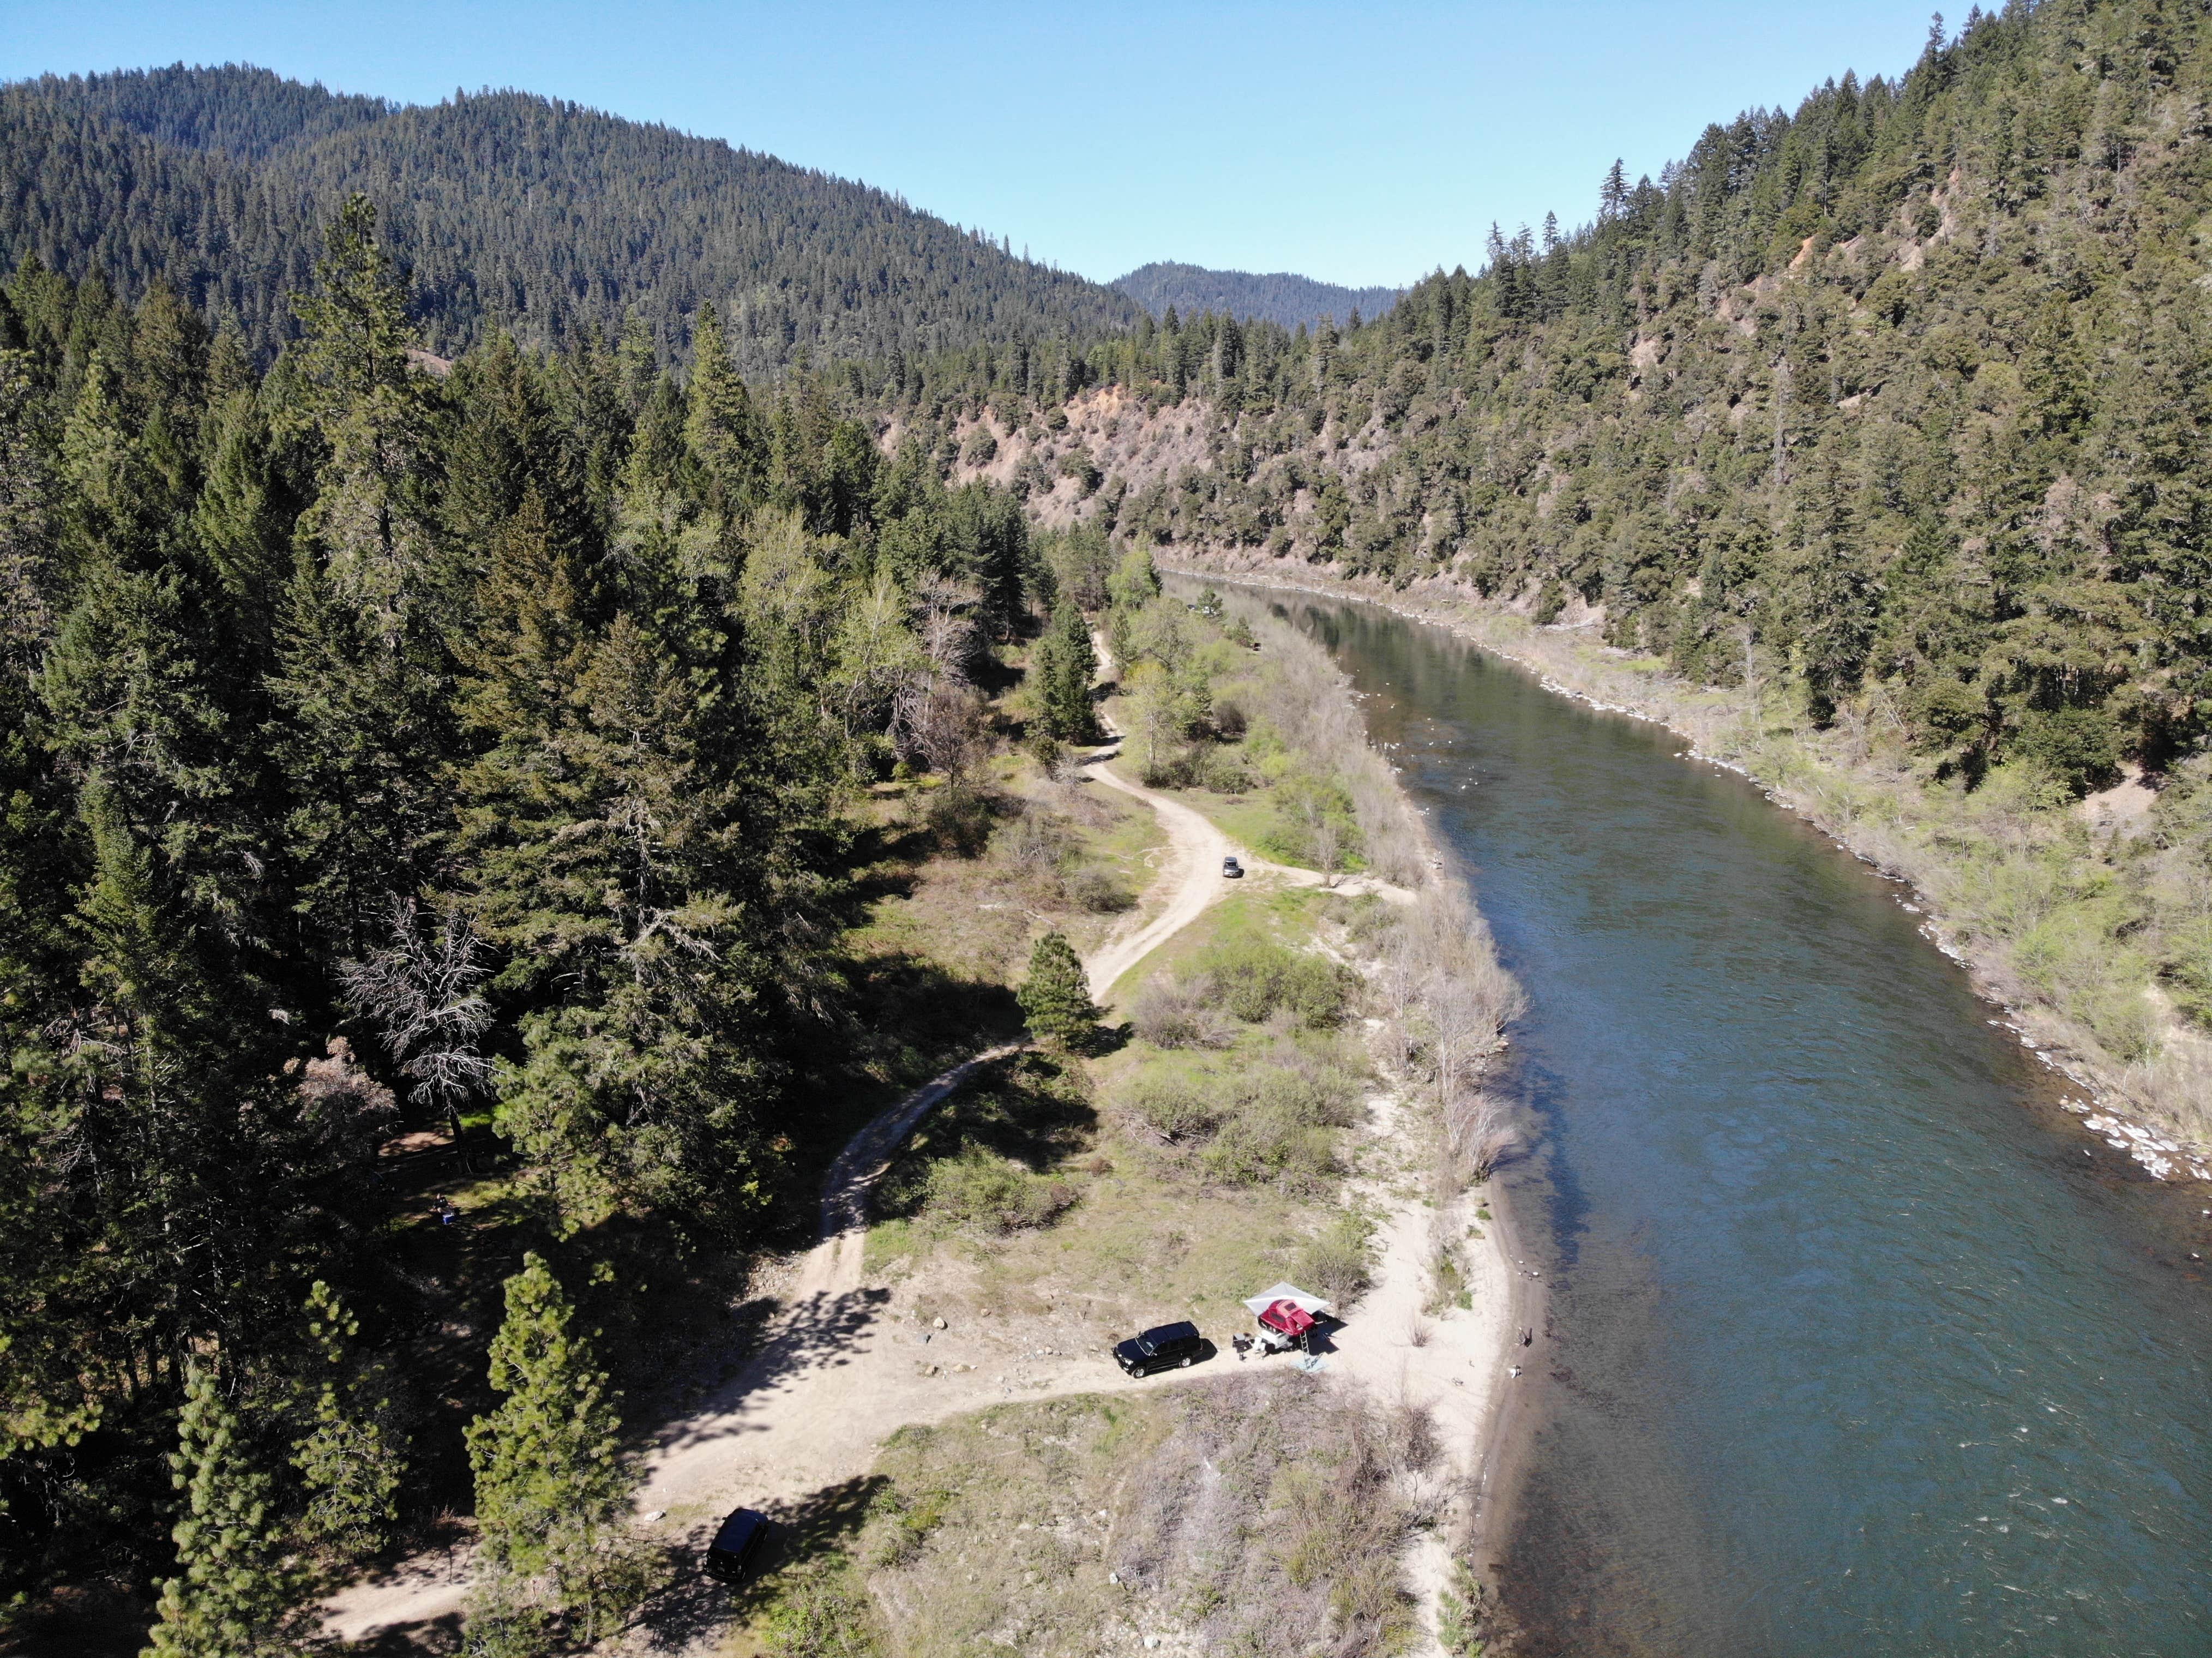 Camper submitted image from BLM Rogue Wild and Scenic River - 2